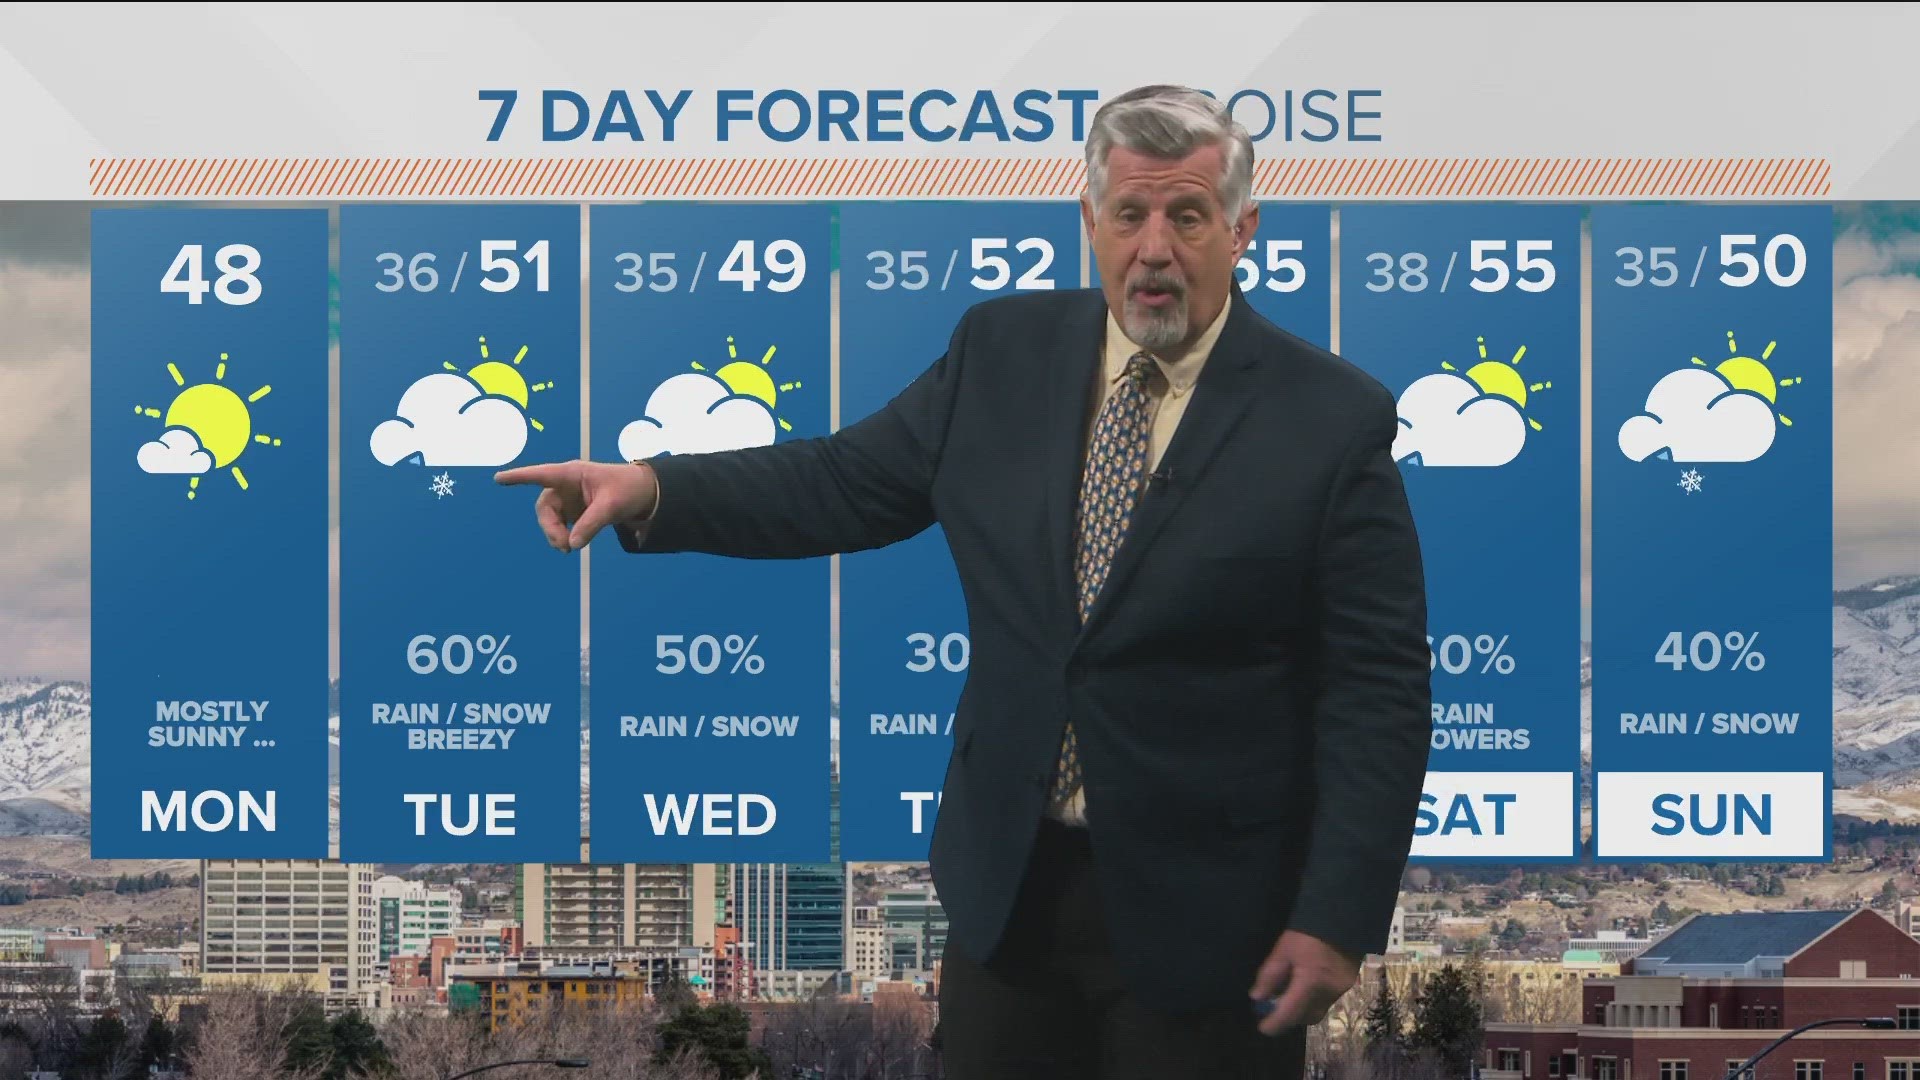 KTVB First Alert Weather Monday, March 27, 2023, in Boise, Idaho, with meteorologist Jim Duthie.